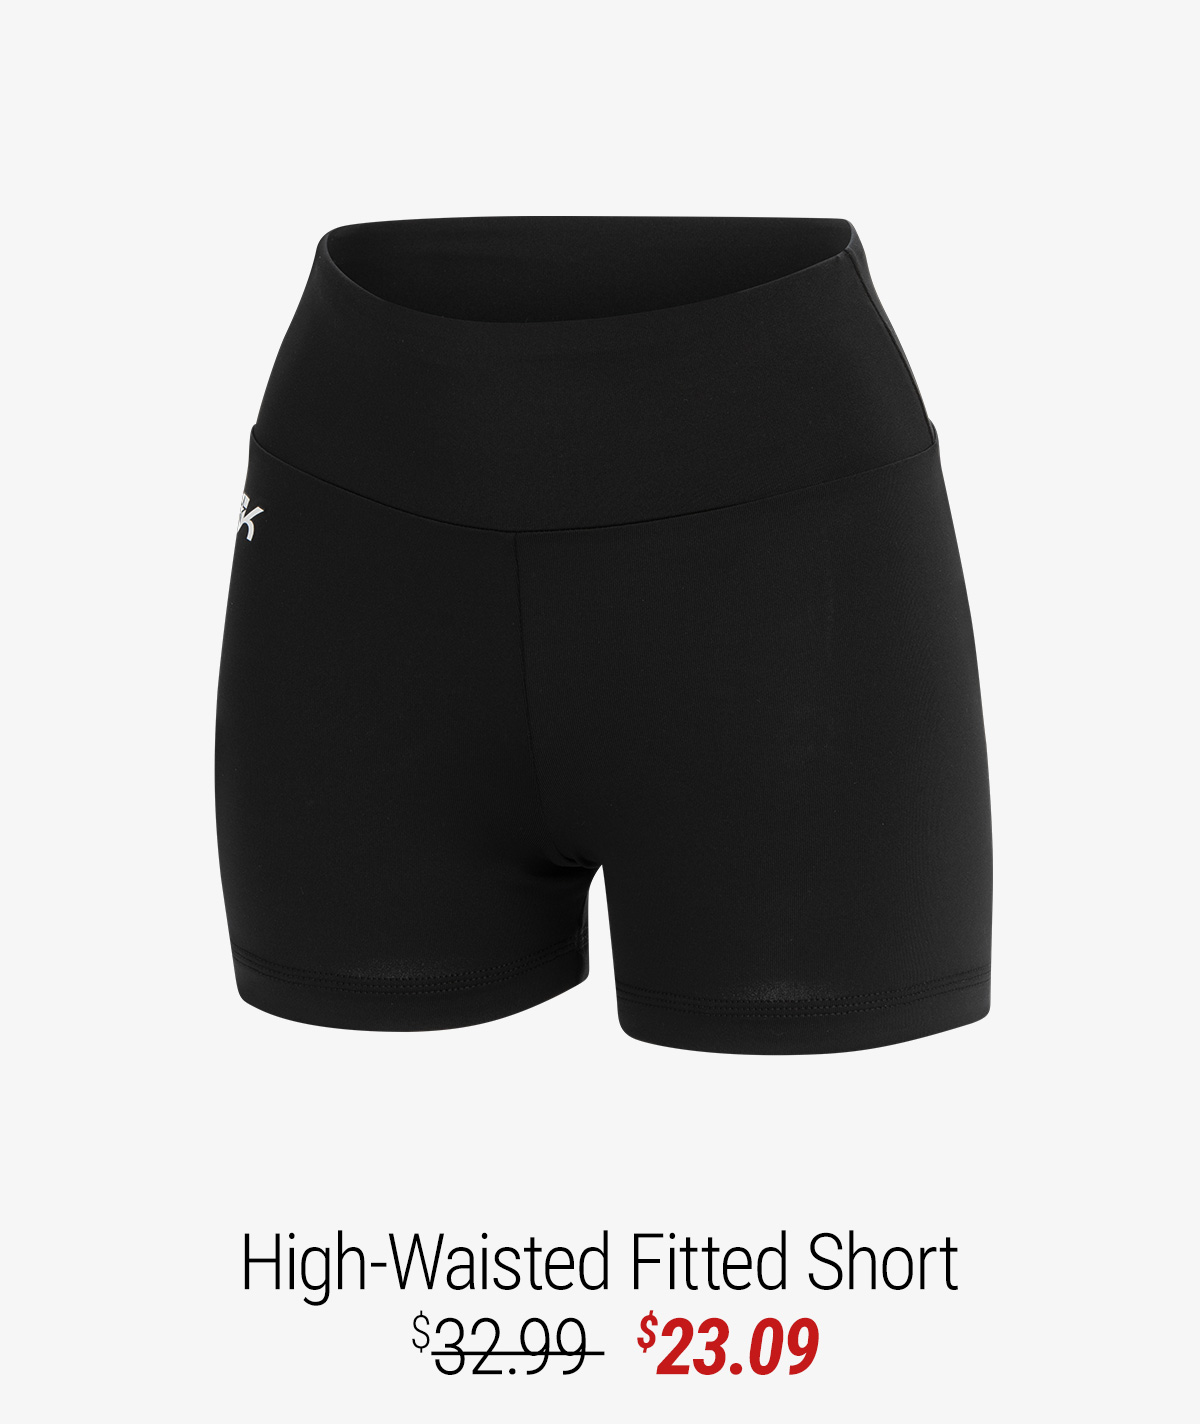 GK ALL STAR HIGH-WAISTED FITTED SHORTS